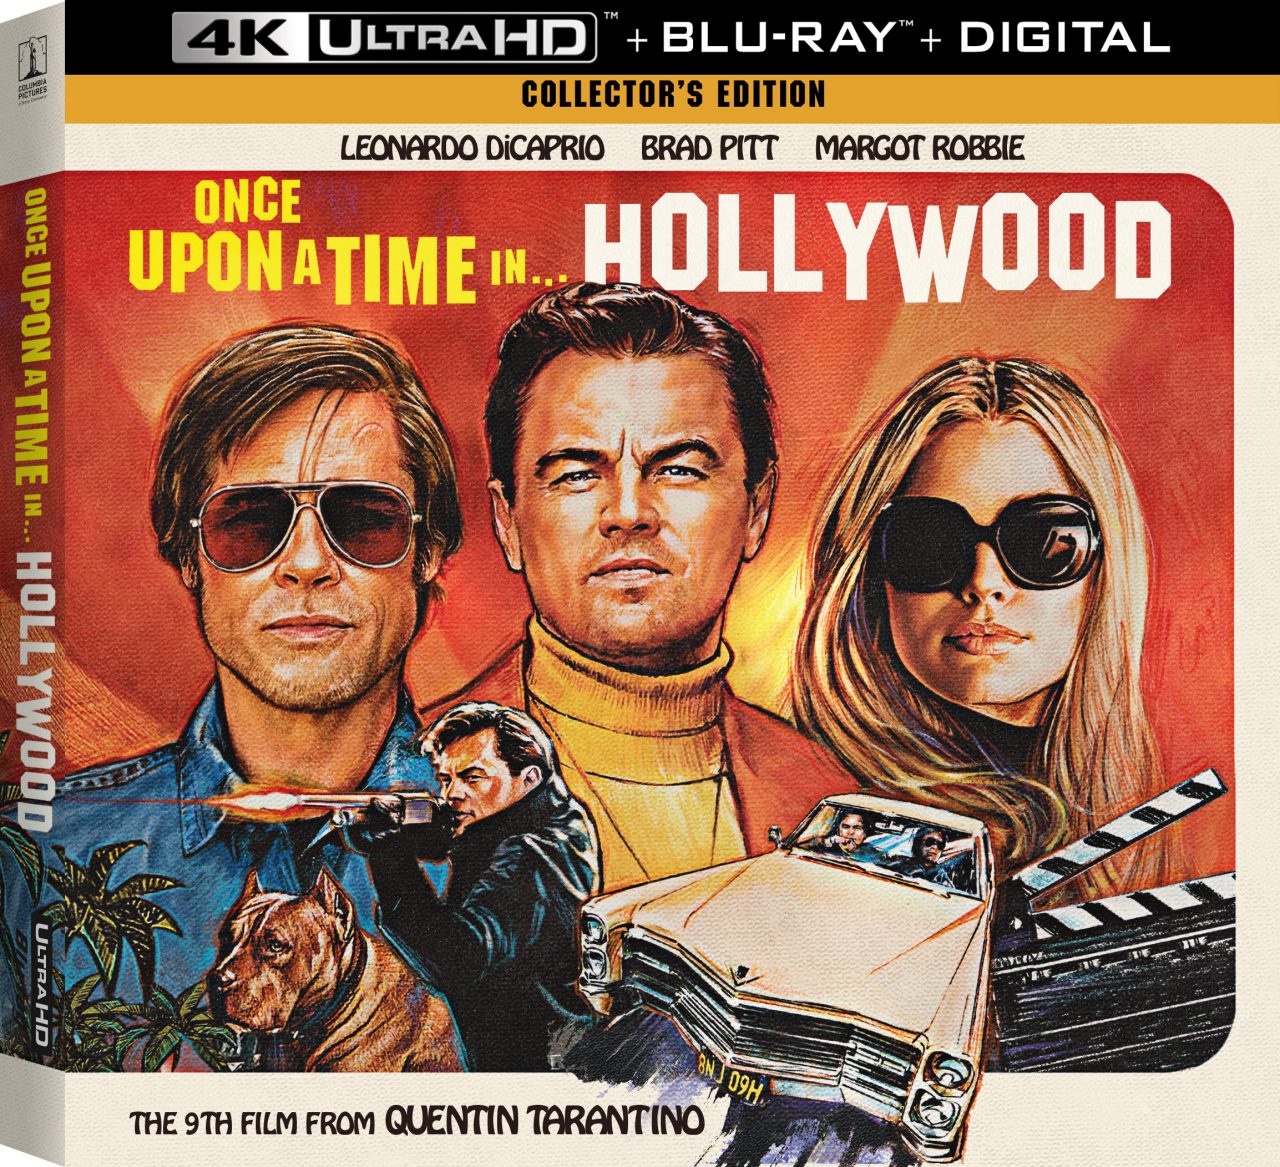 Once Upon A Time In Hollywood 4K Ultra HD Combo Collector's Pack (Sony Pictures)